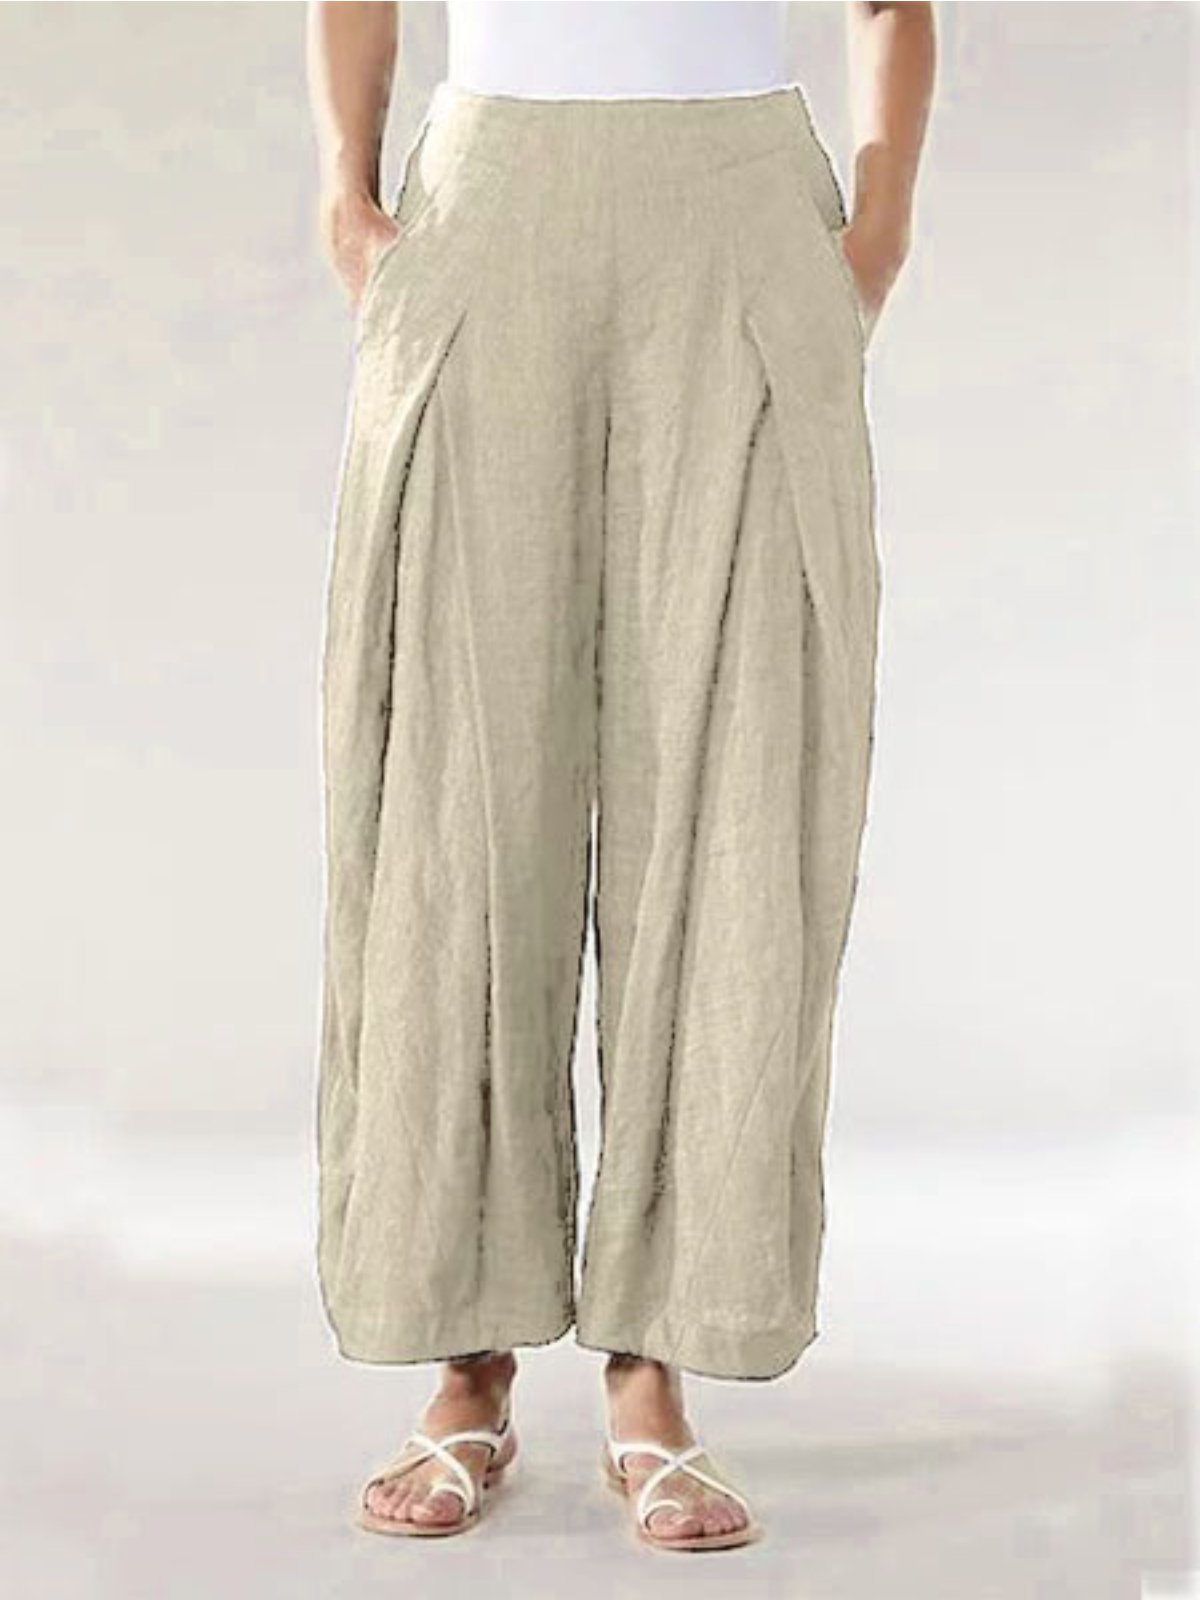 Cotton Solid Pockets Pants